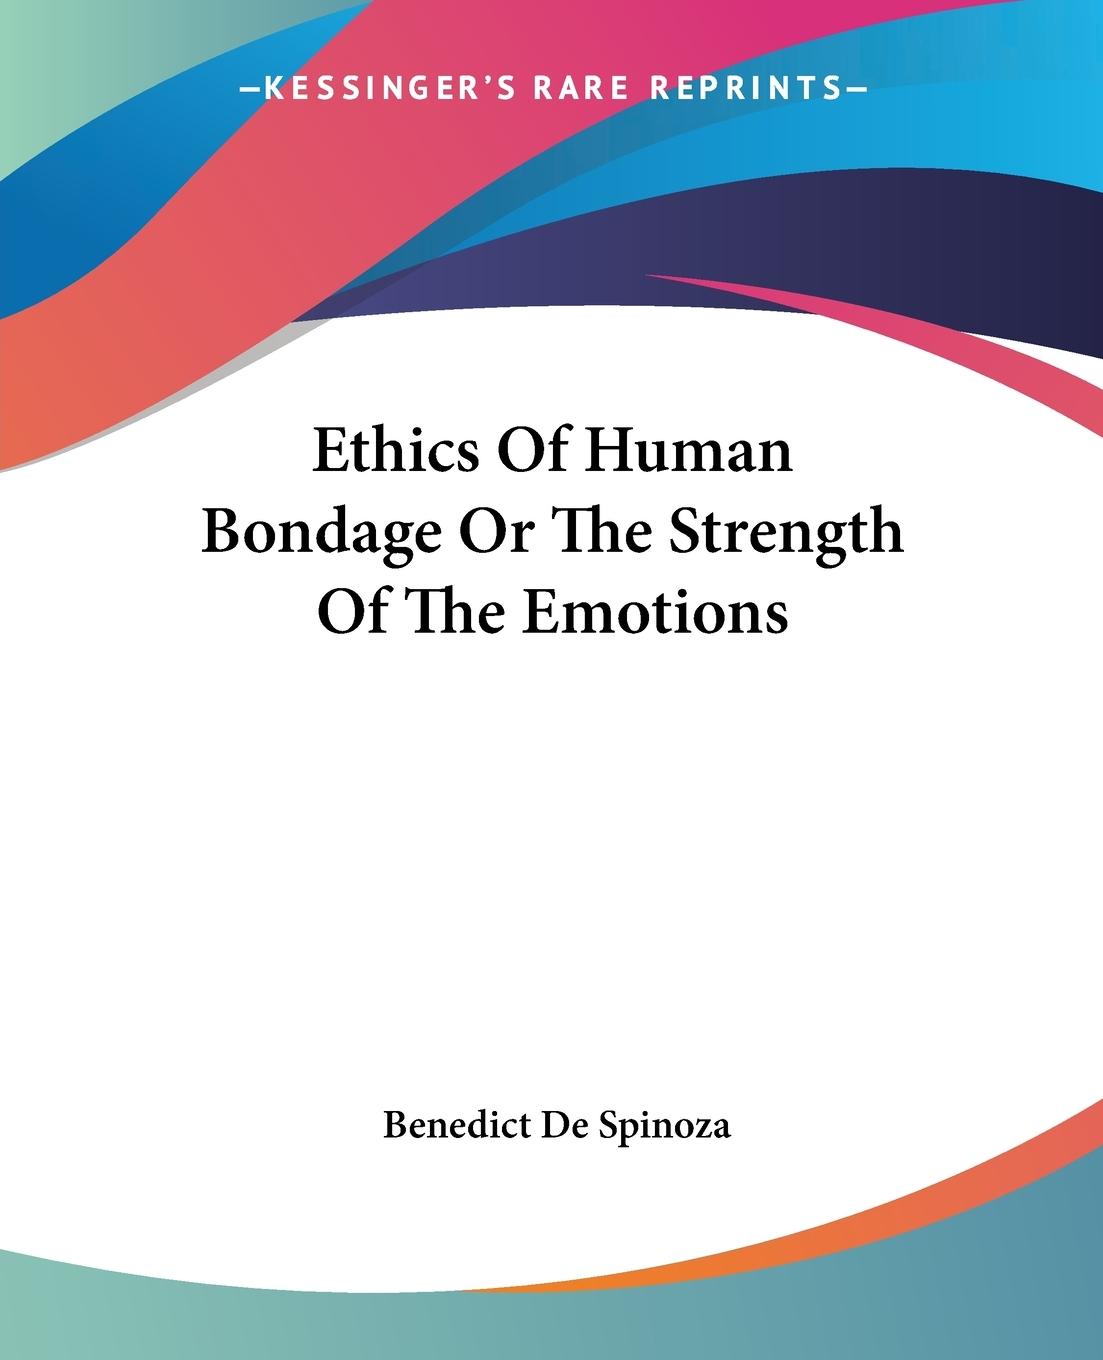 Ethics Of Human Bondage Or The Strength Of The Emotions - Spinoza, Benedict De